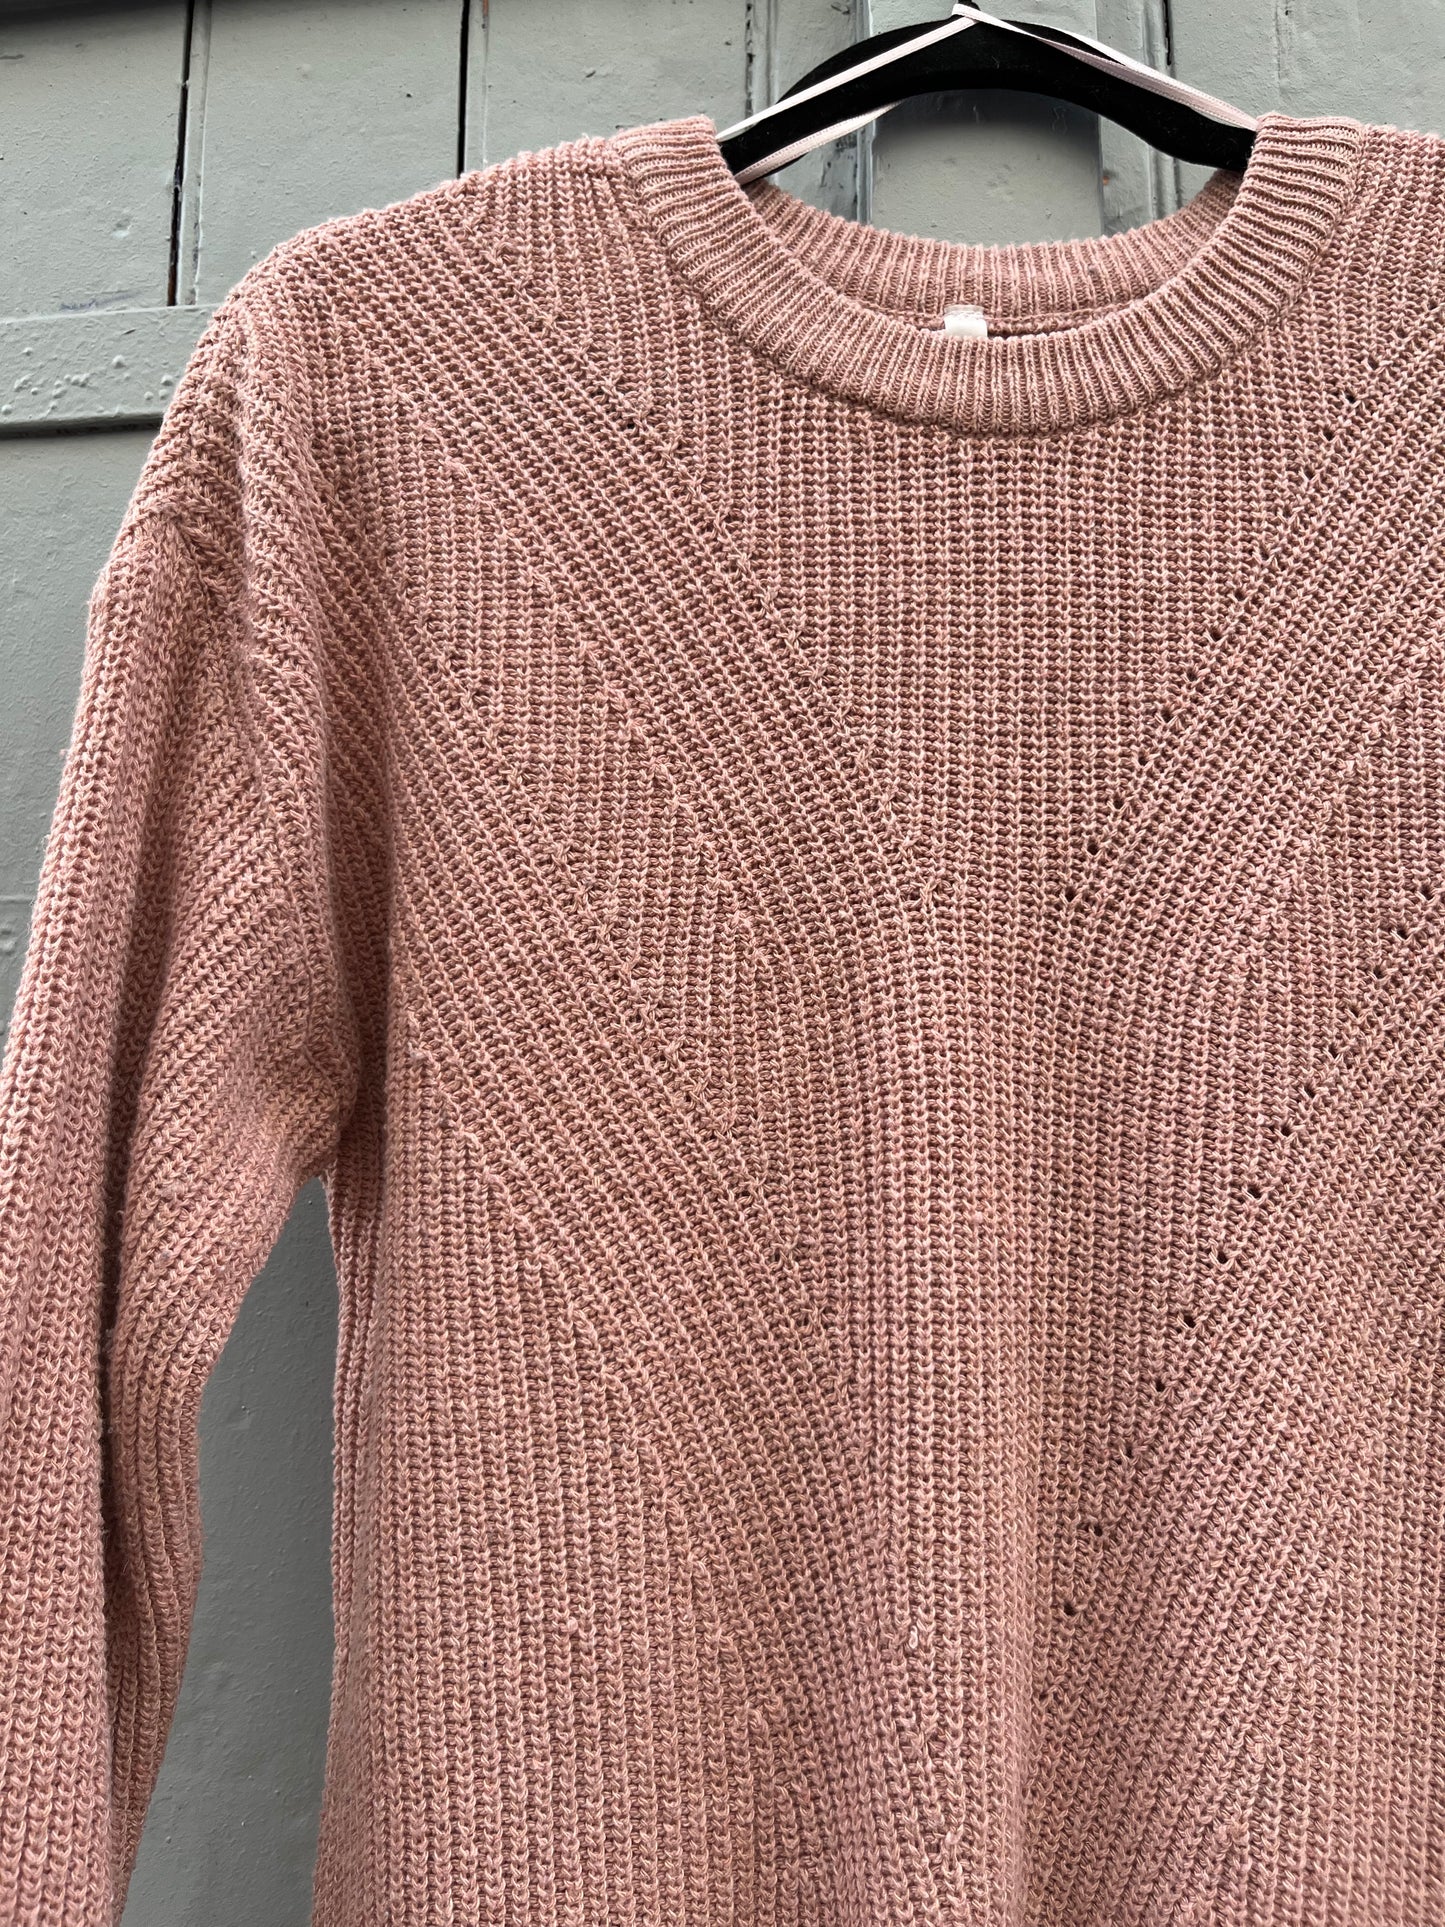 Le pull, DF YOUNG, taille 36